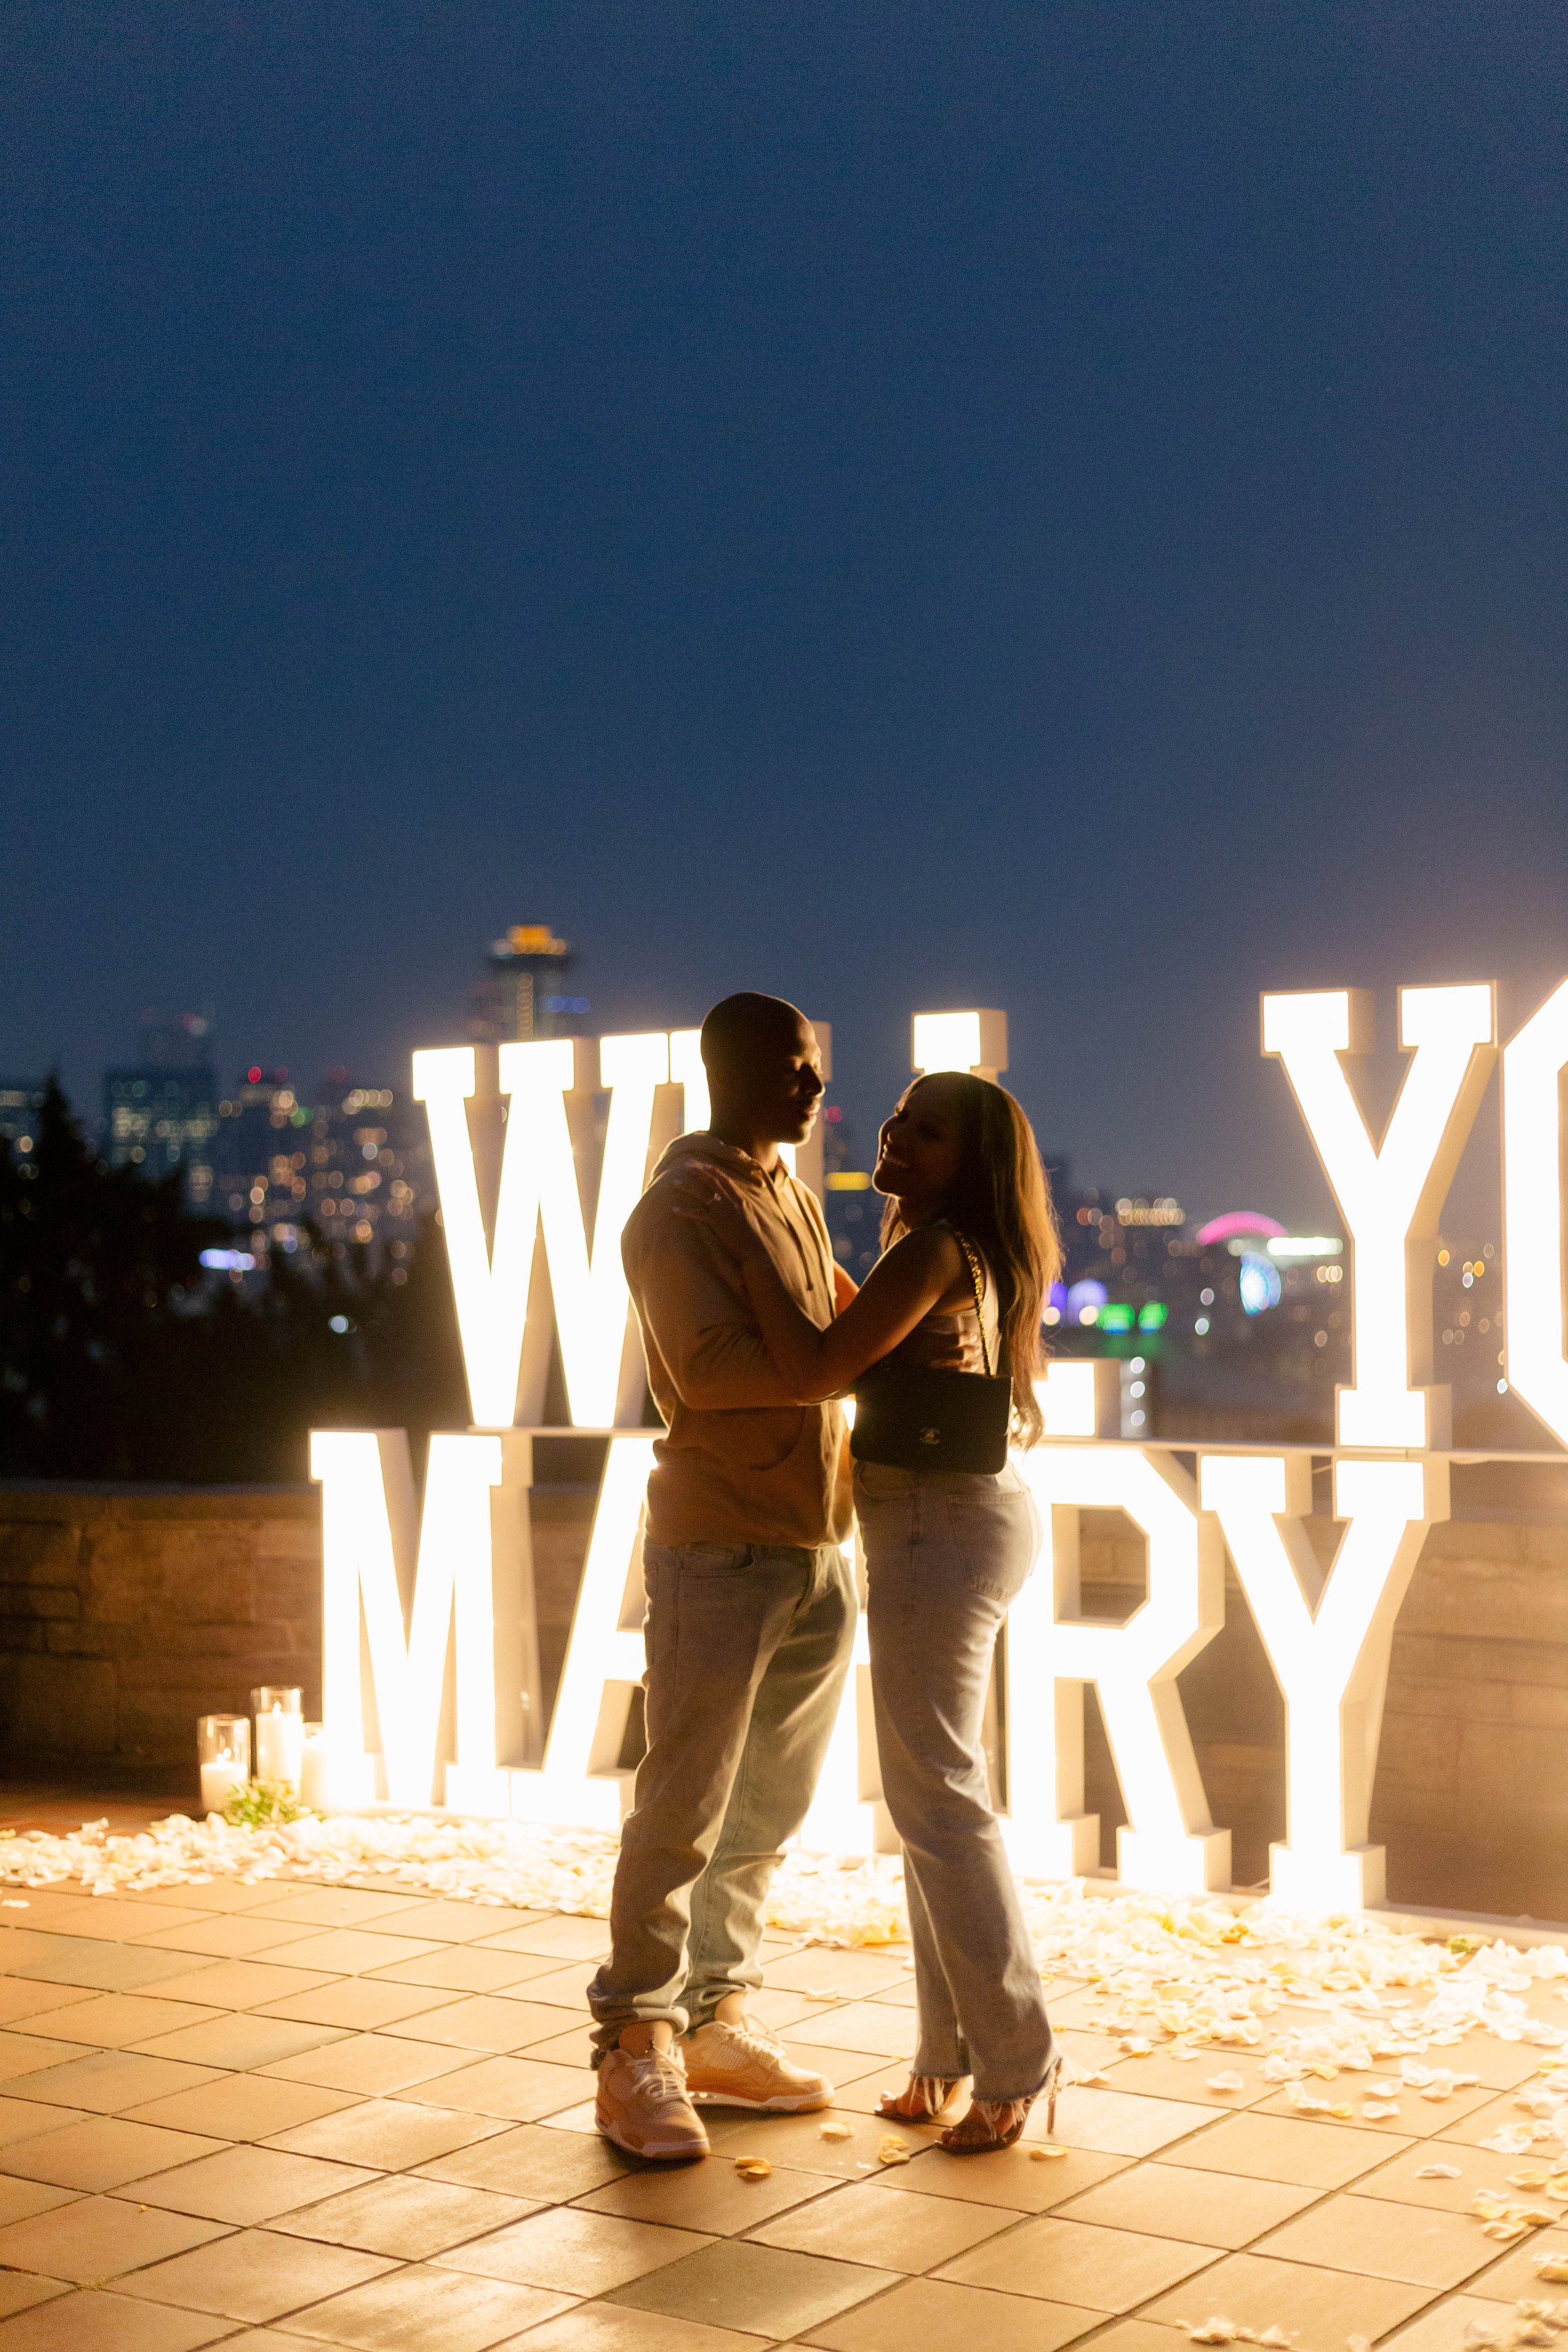 pacific-engagements-wedding-planning-and-design-seattle-seahawk-tyler-lockett-fiance-lauren-jackson-engaged-kerry-park-kerry-jeanne-photography-a-to-z-marquee-letter-rental